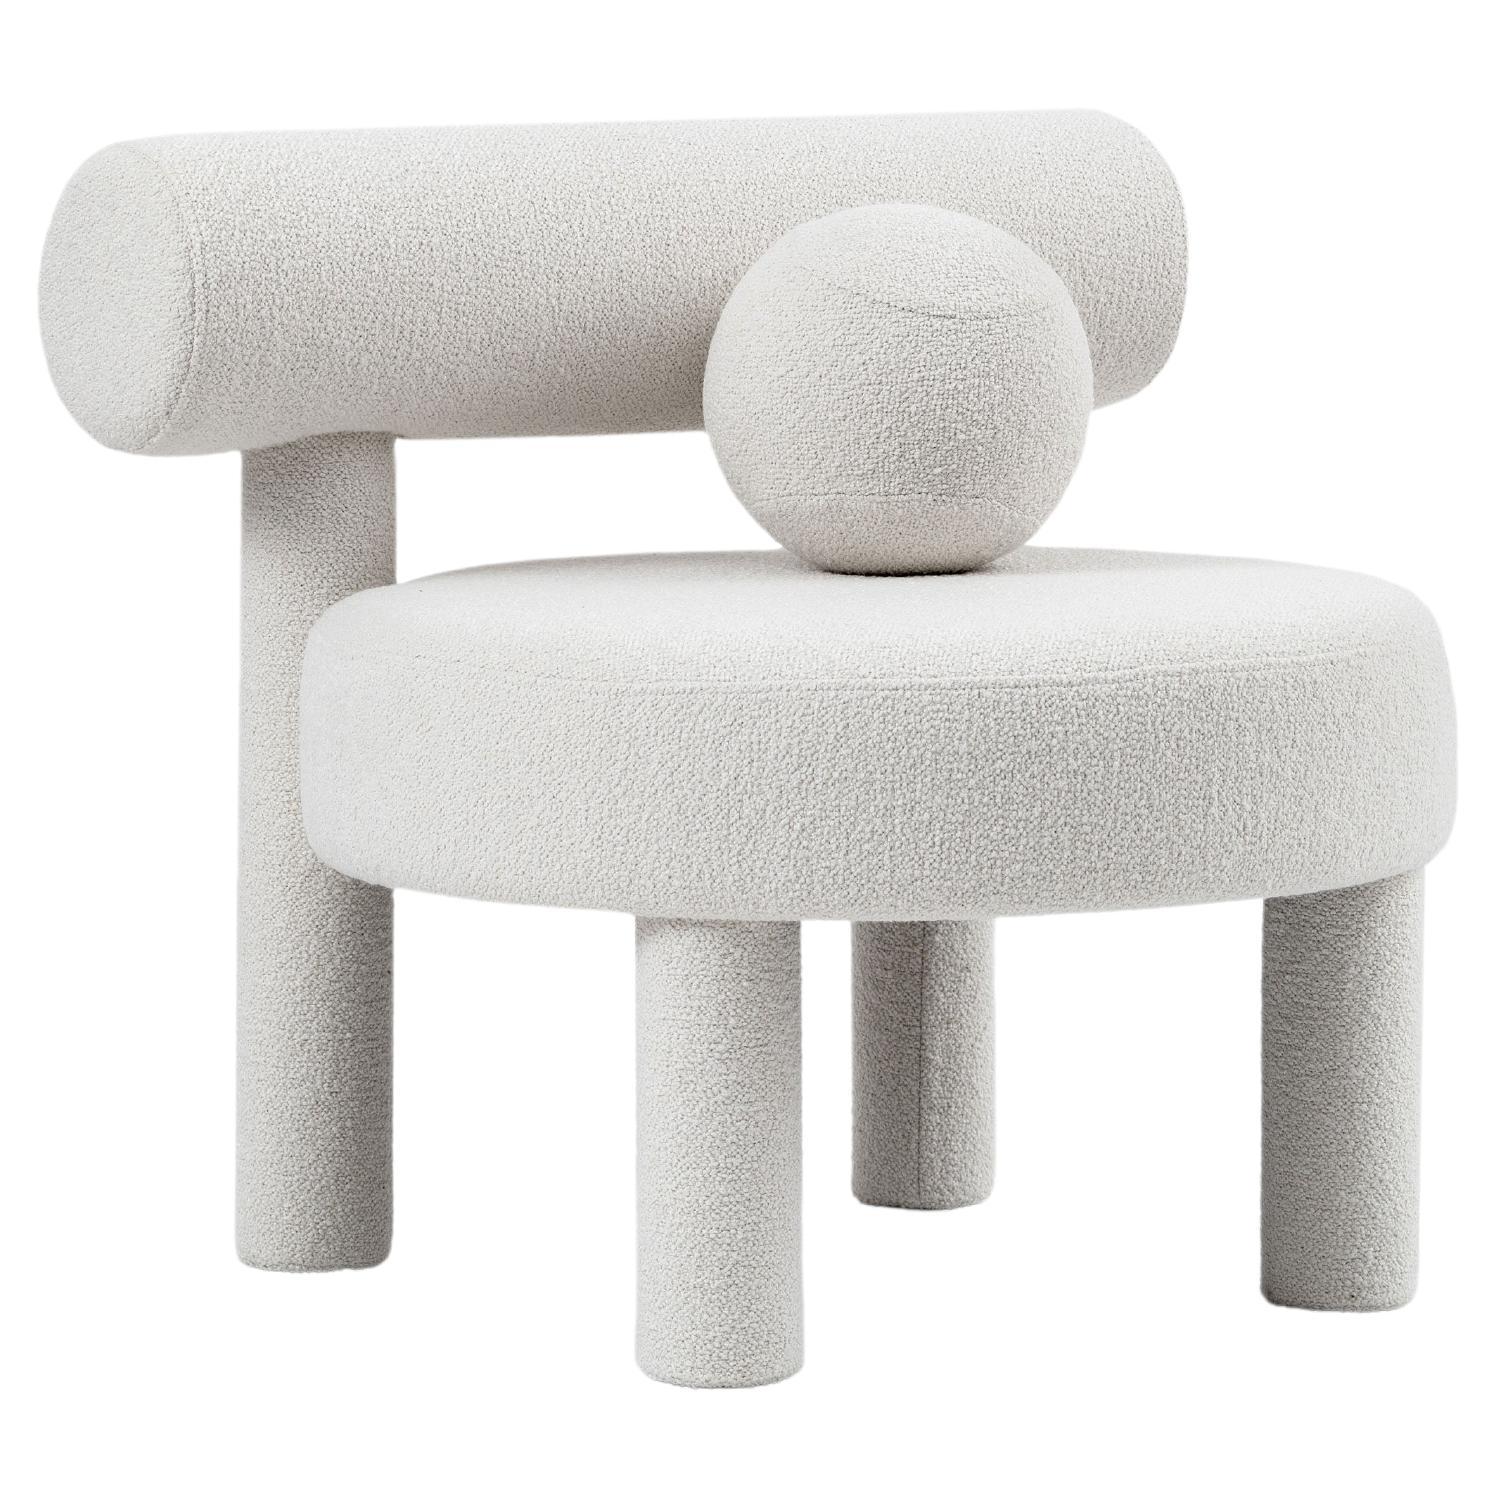 Low Chair 'GROPIUS CS1' by NOOM, Fully upholstered in Bouclé, White For Sale